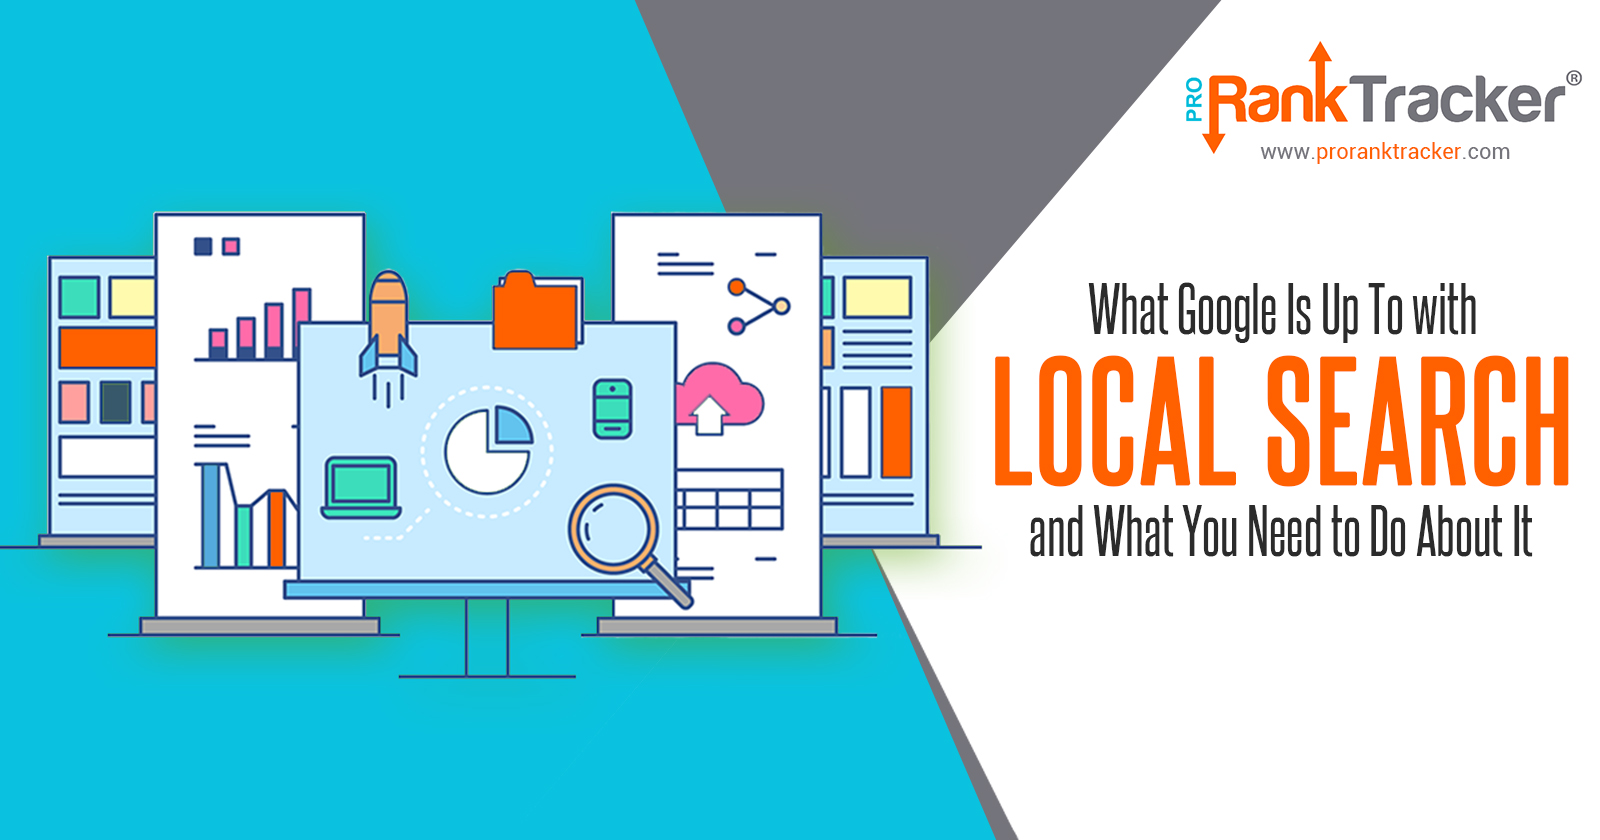 What Google Is Up To with Local Search and What You Need to Do About It 4-R